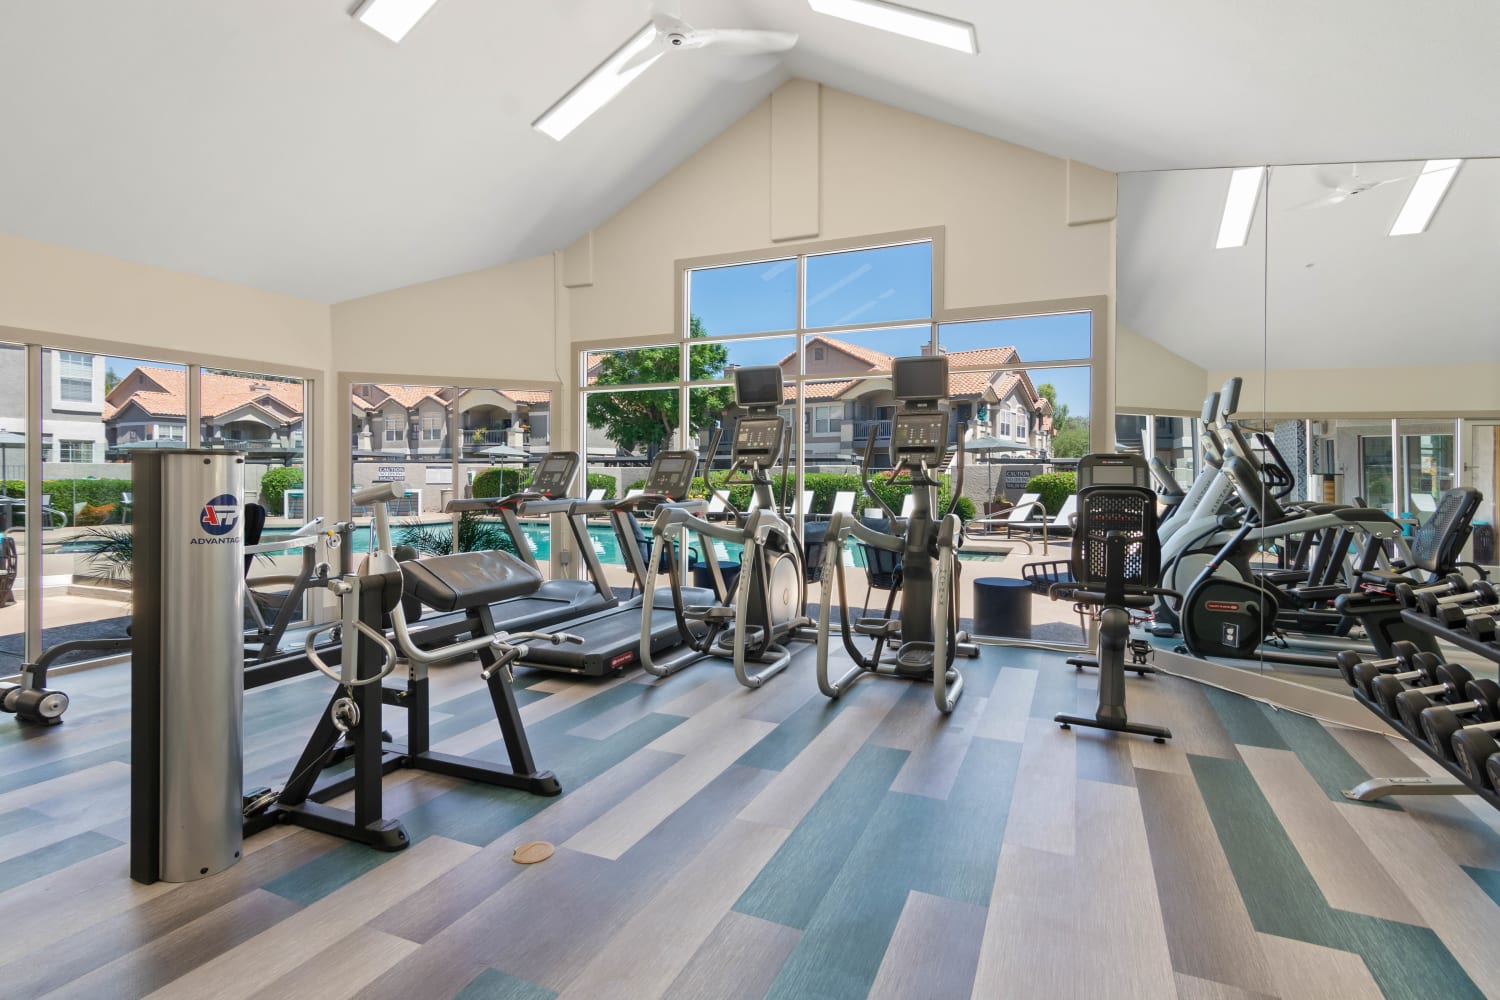 Fitness center featuring stat of the art equipment at Sonoran Vista Apartments in Scottsdale, Arizona